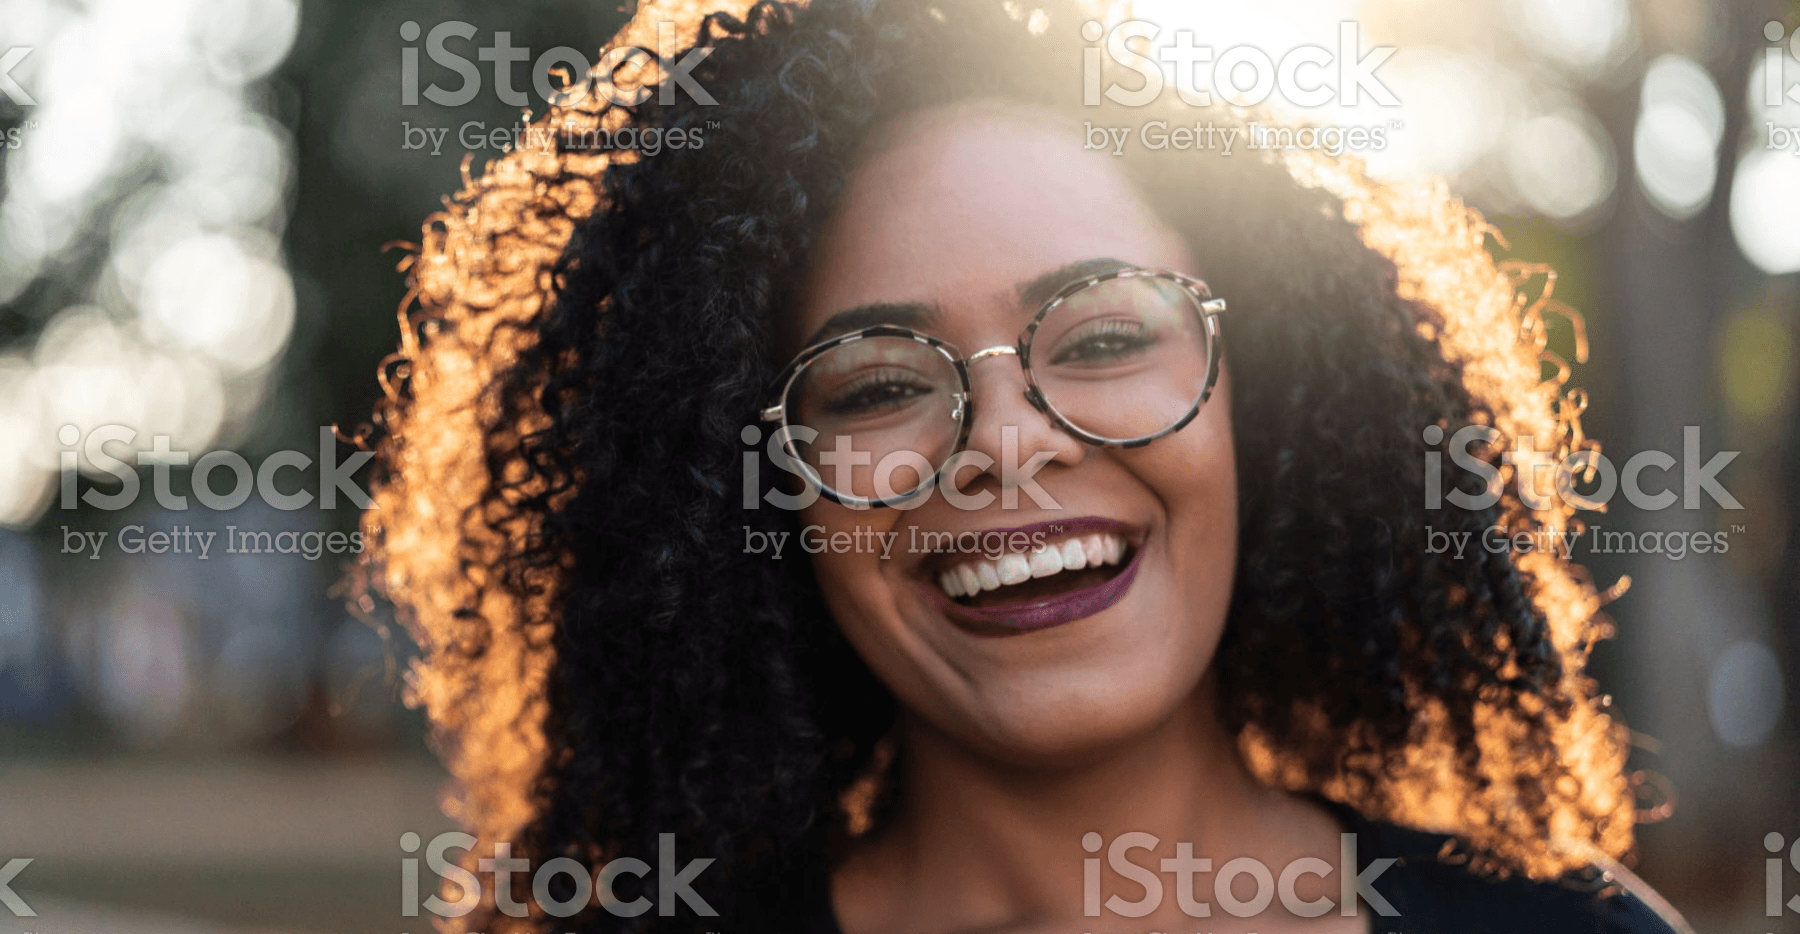 smiling woman with glasses looks at camera